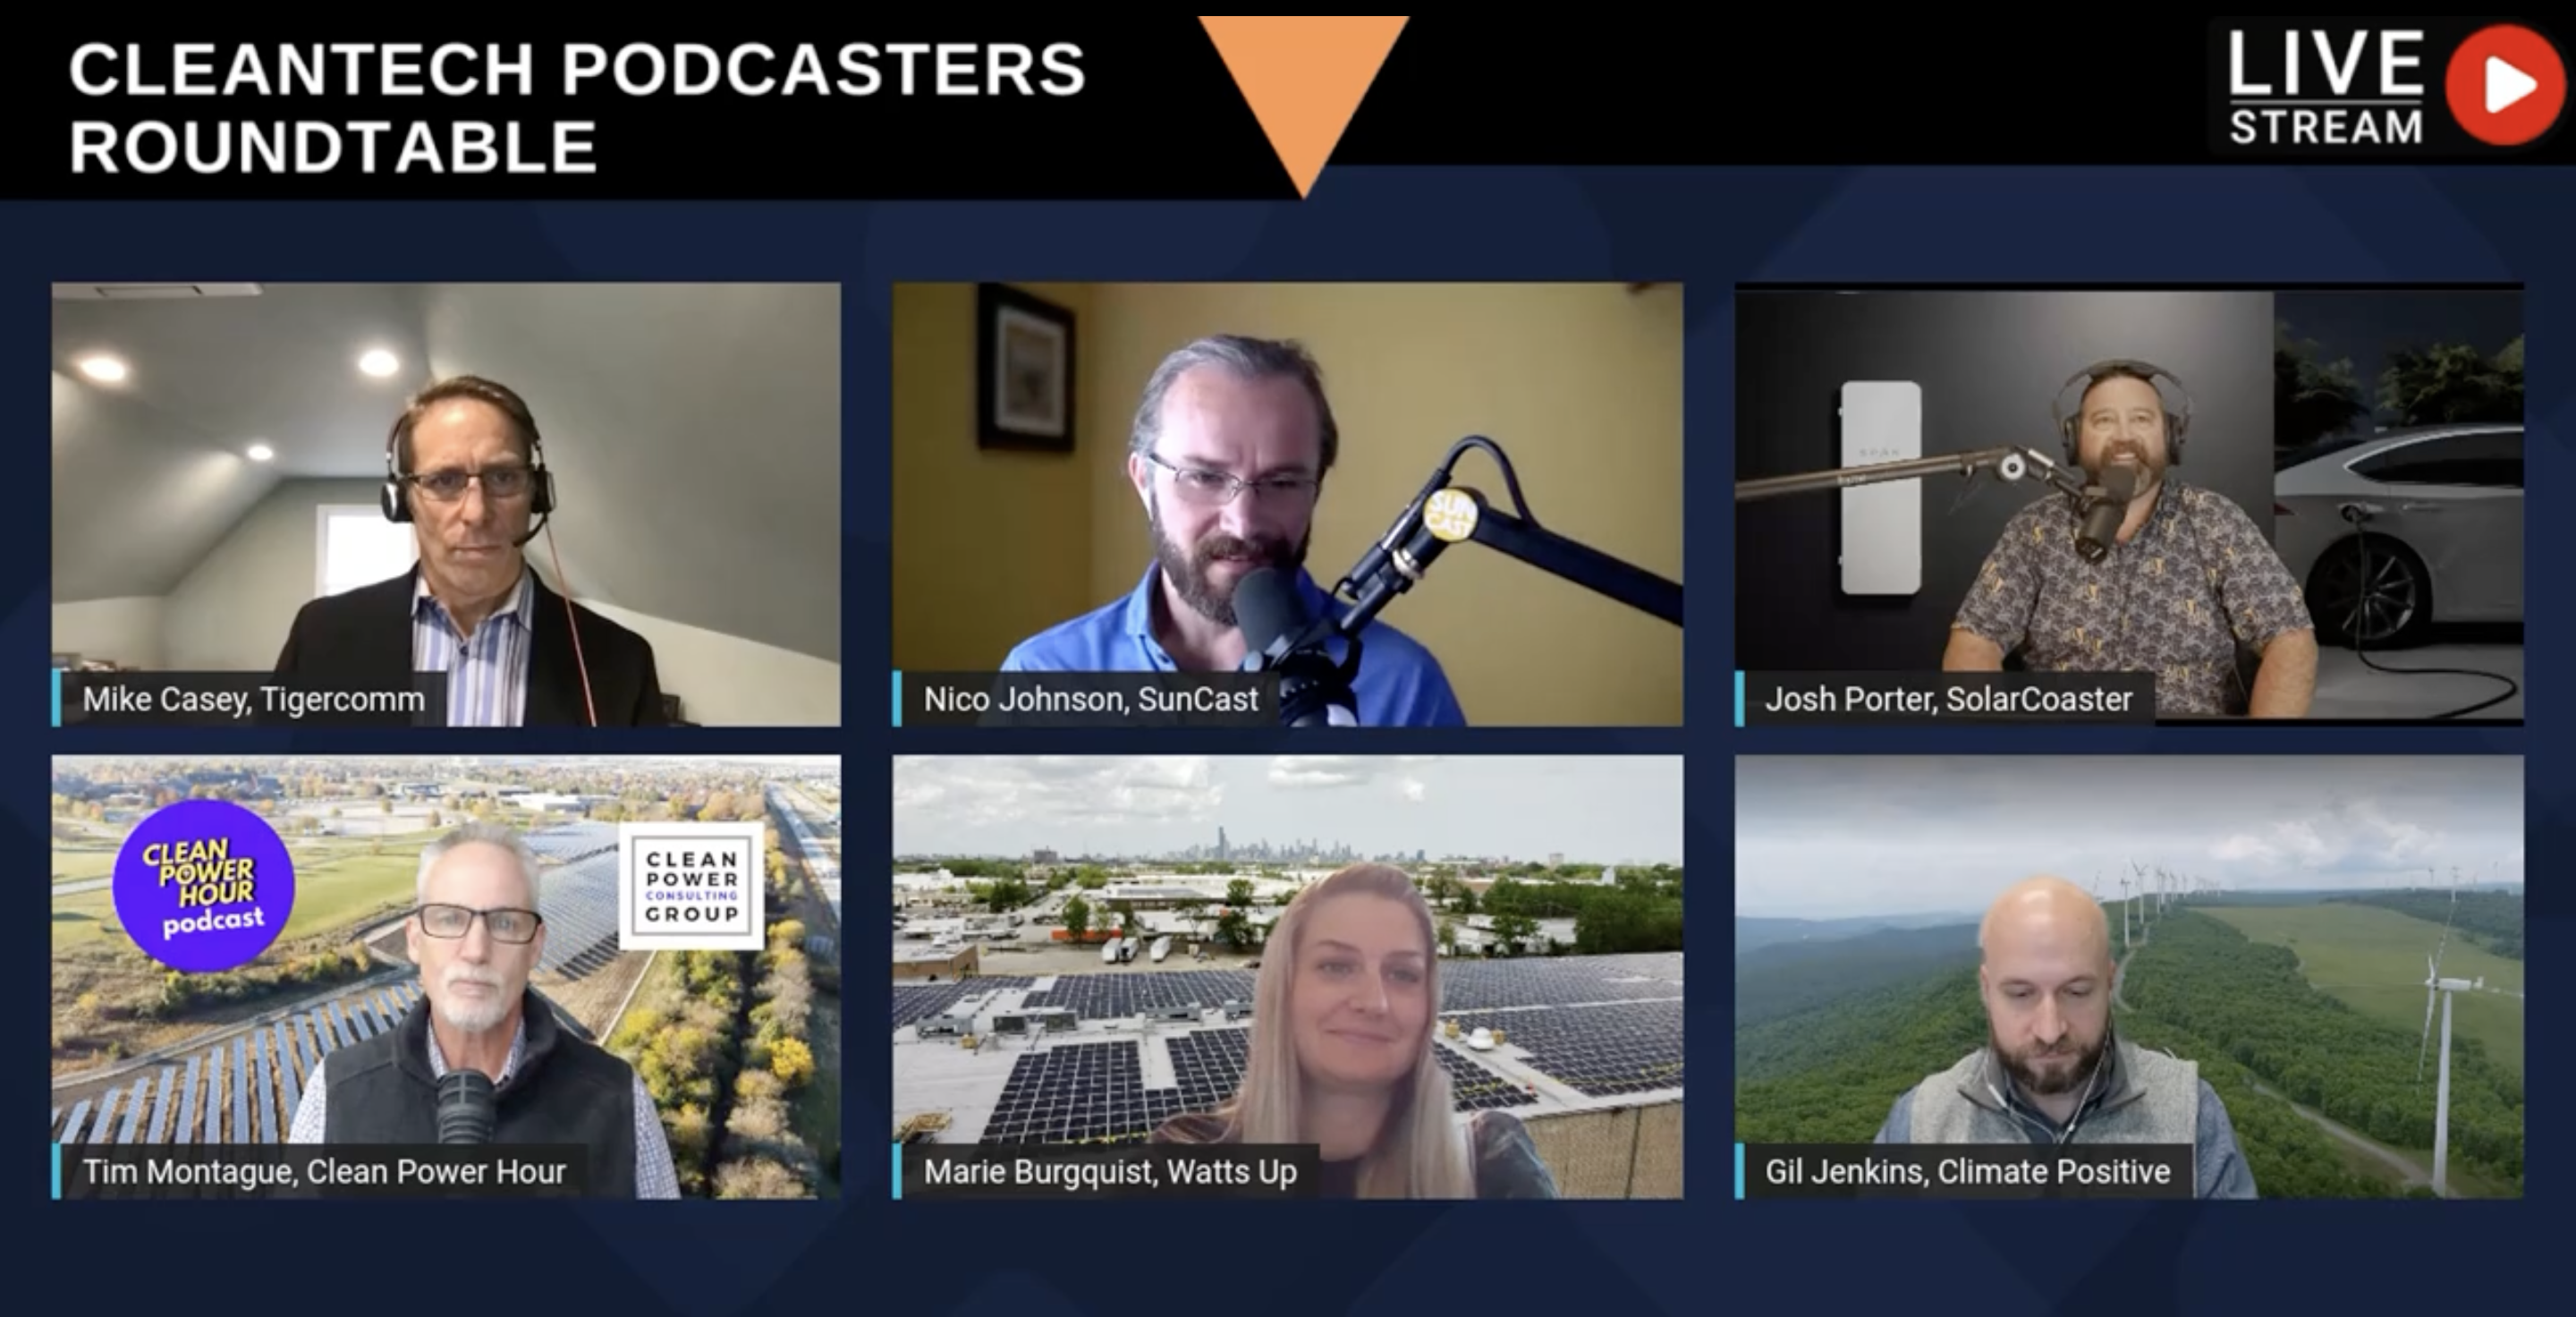 4th Cleantech Podcasters Roundtable by Tigercomm & SunCast Media